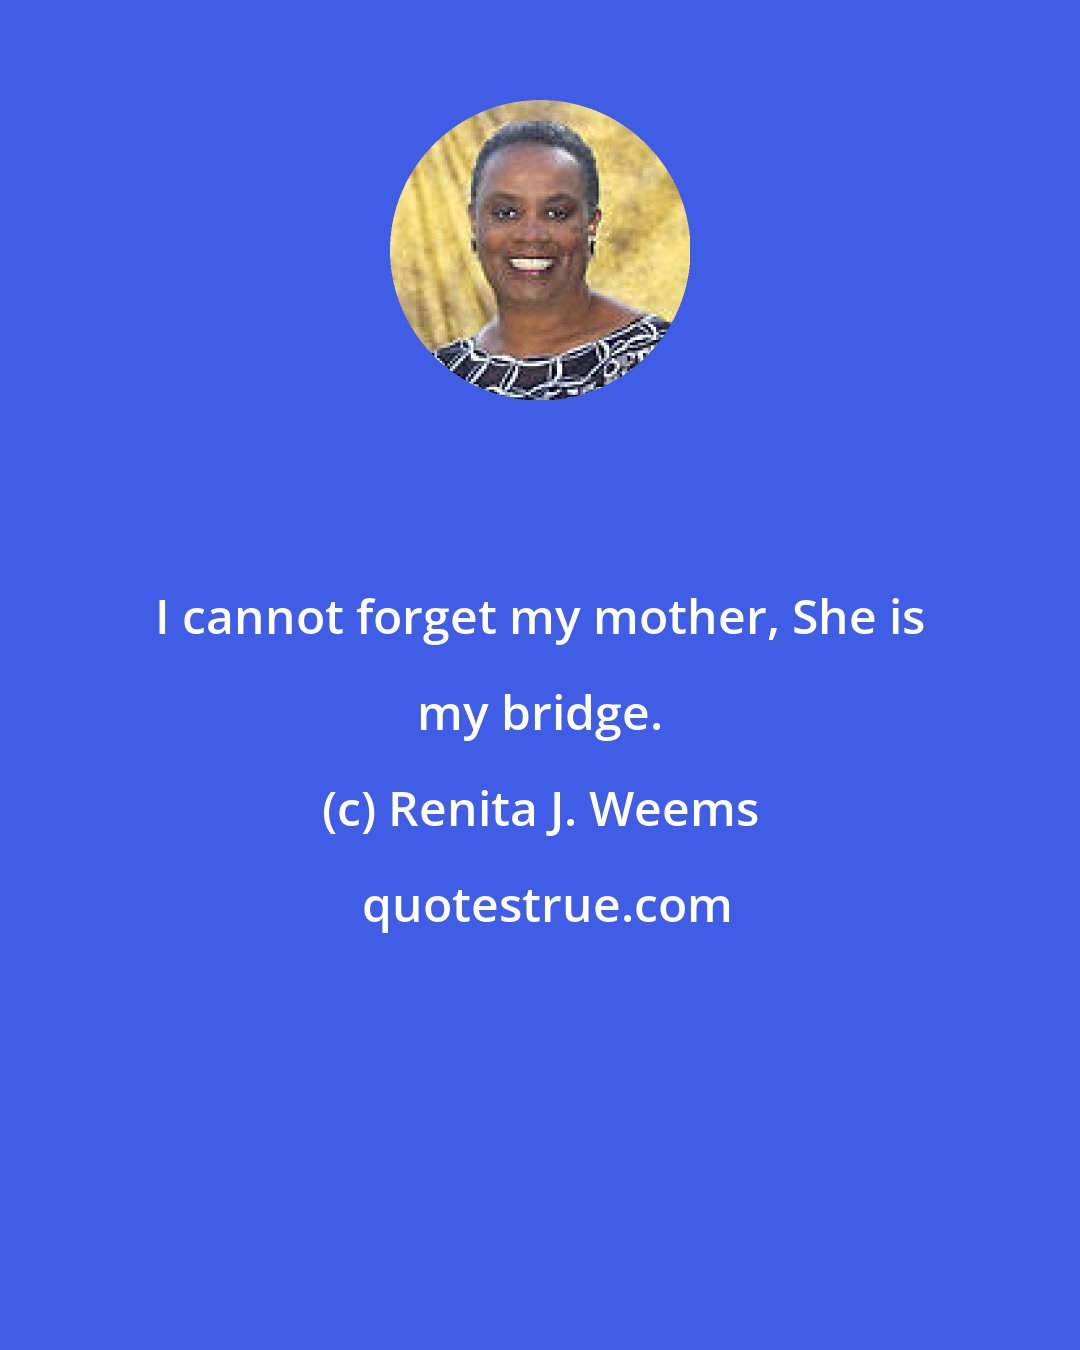 Renita J. Weems: I cannot forget my mother, She is my bridge.